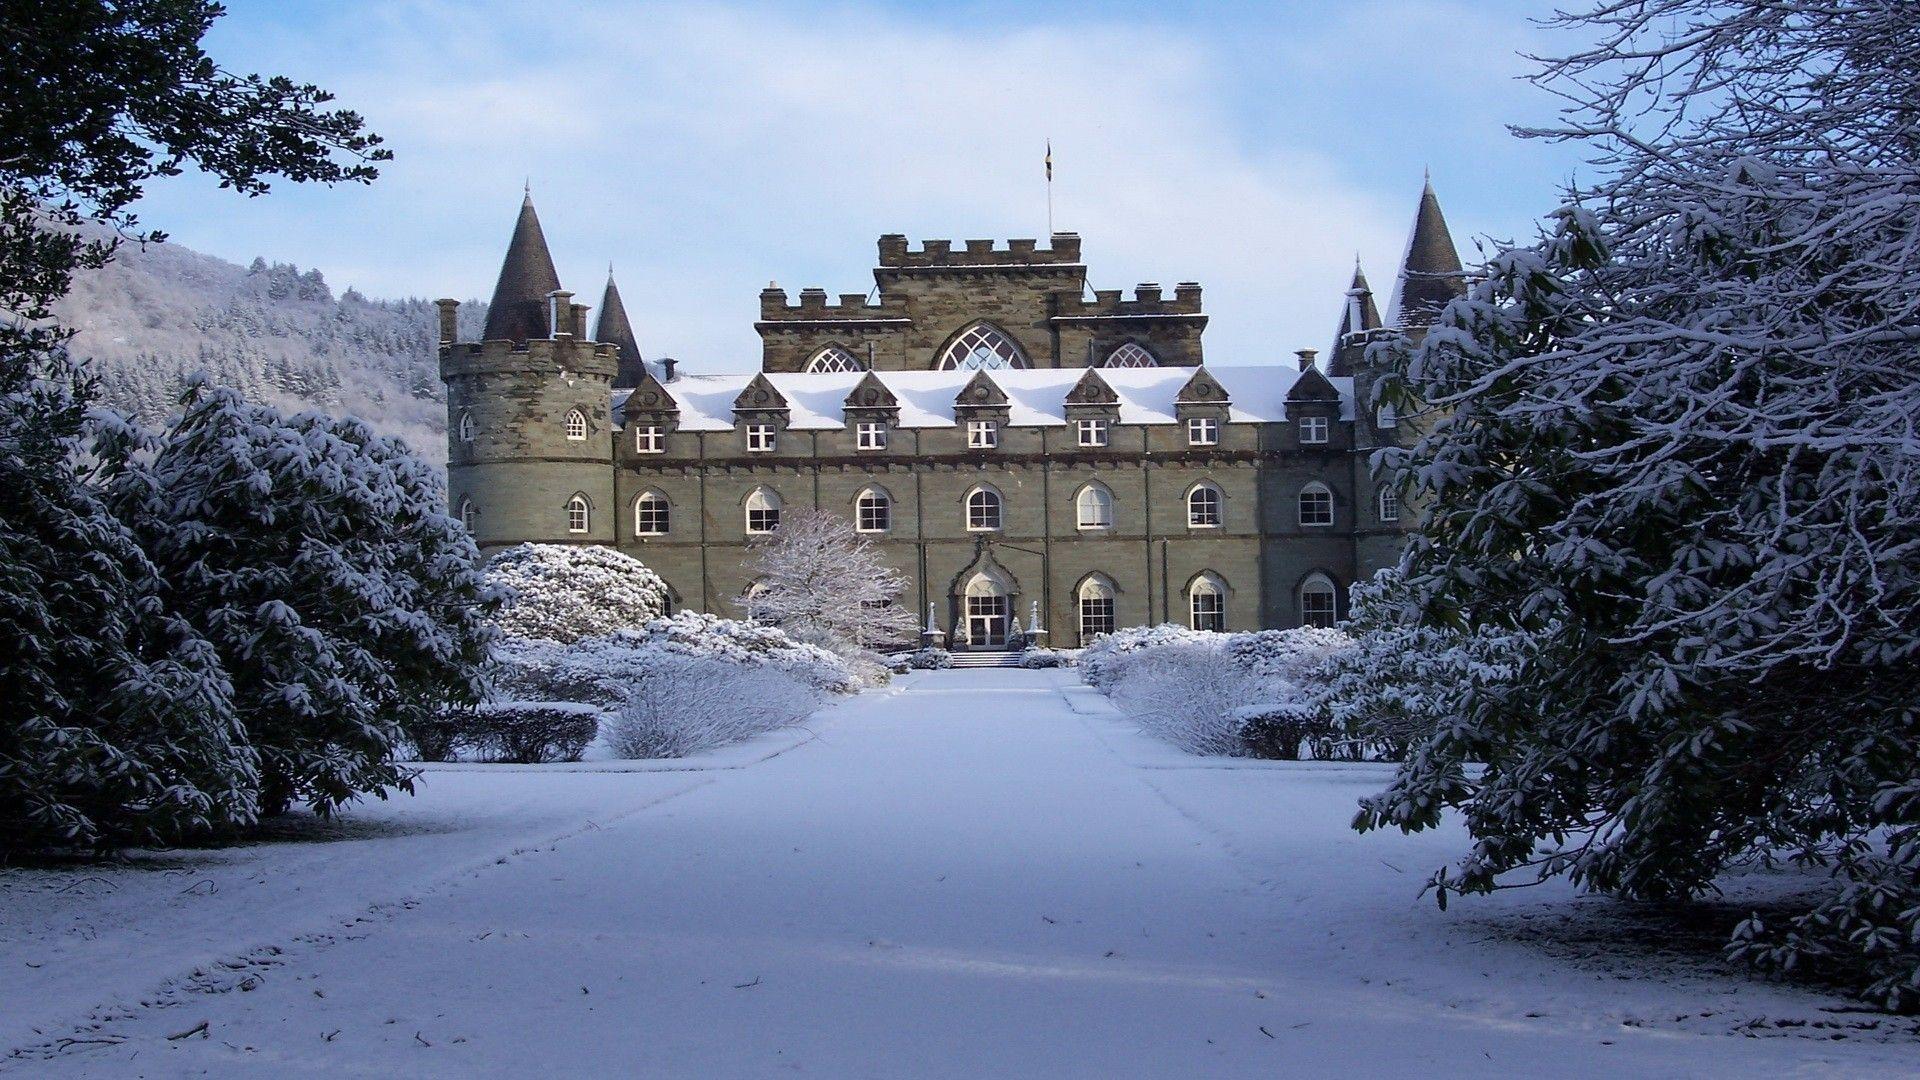 Snowy Castle in Scotland wallpaper and image